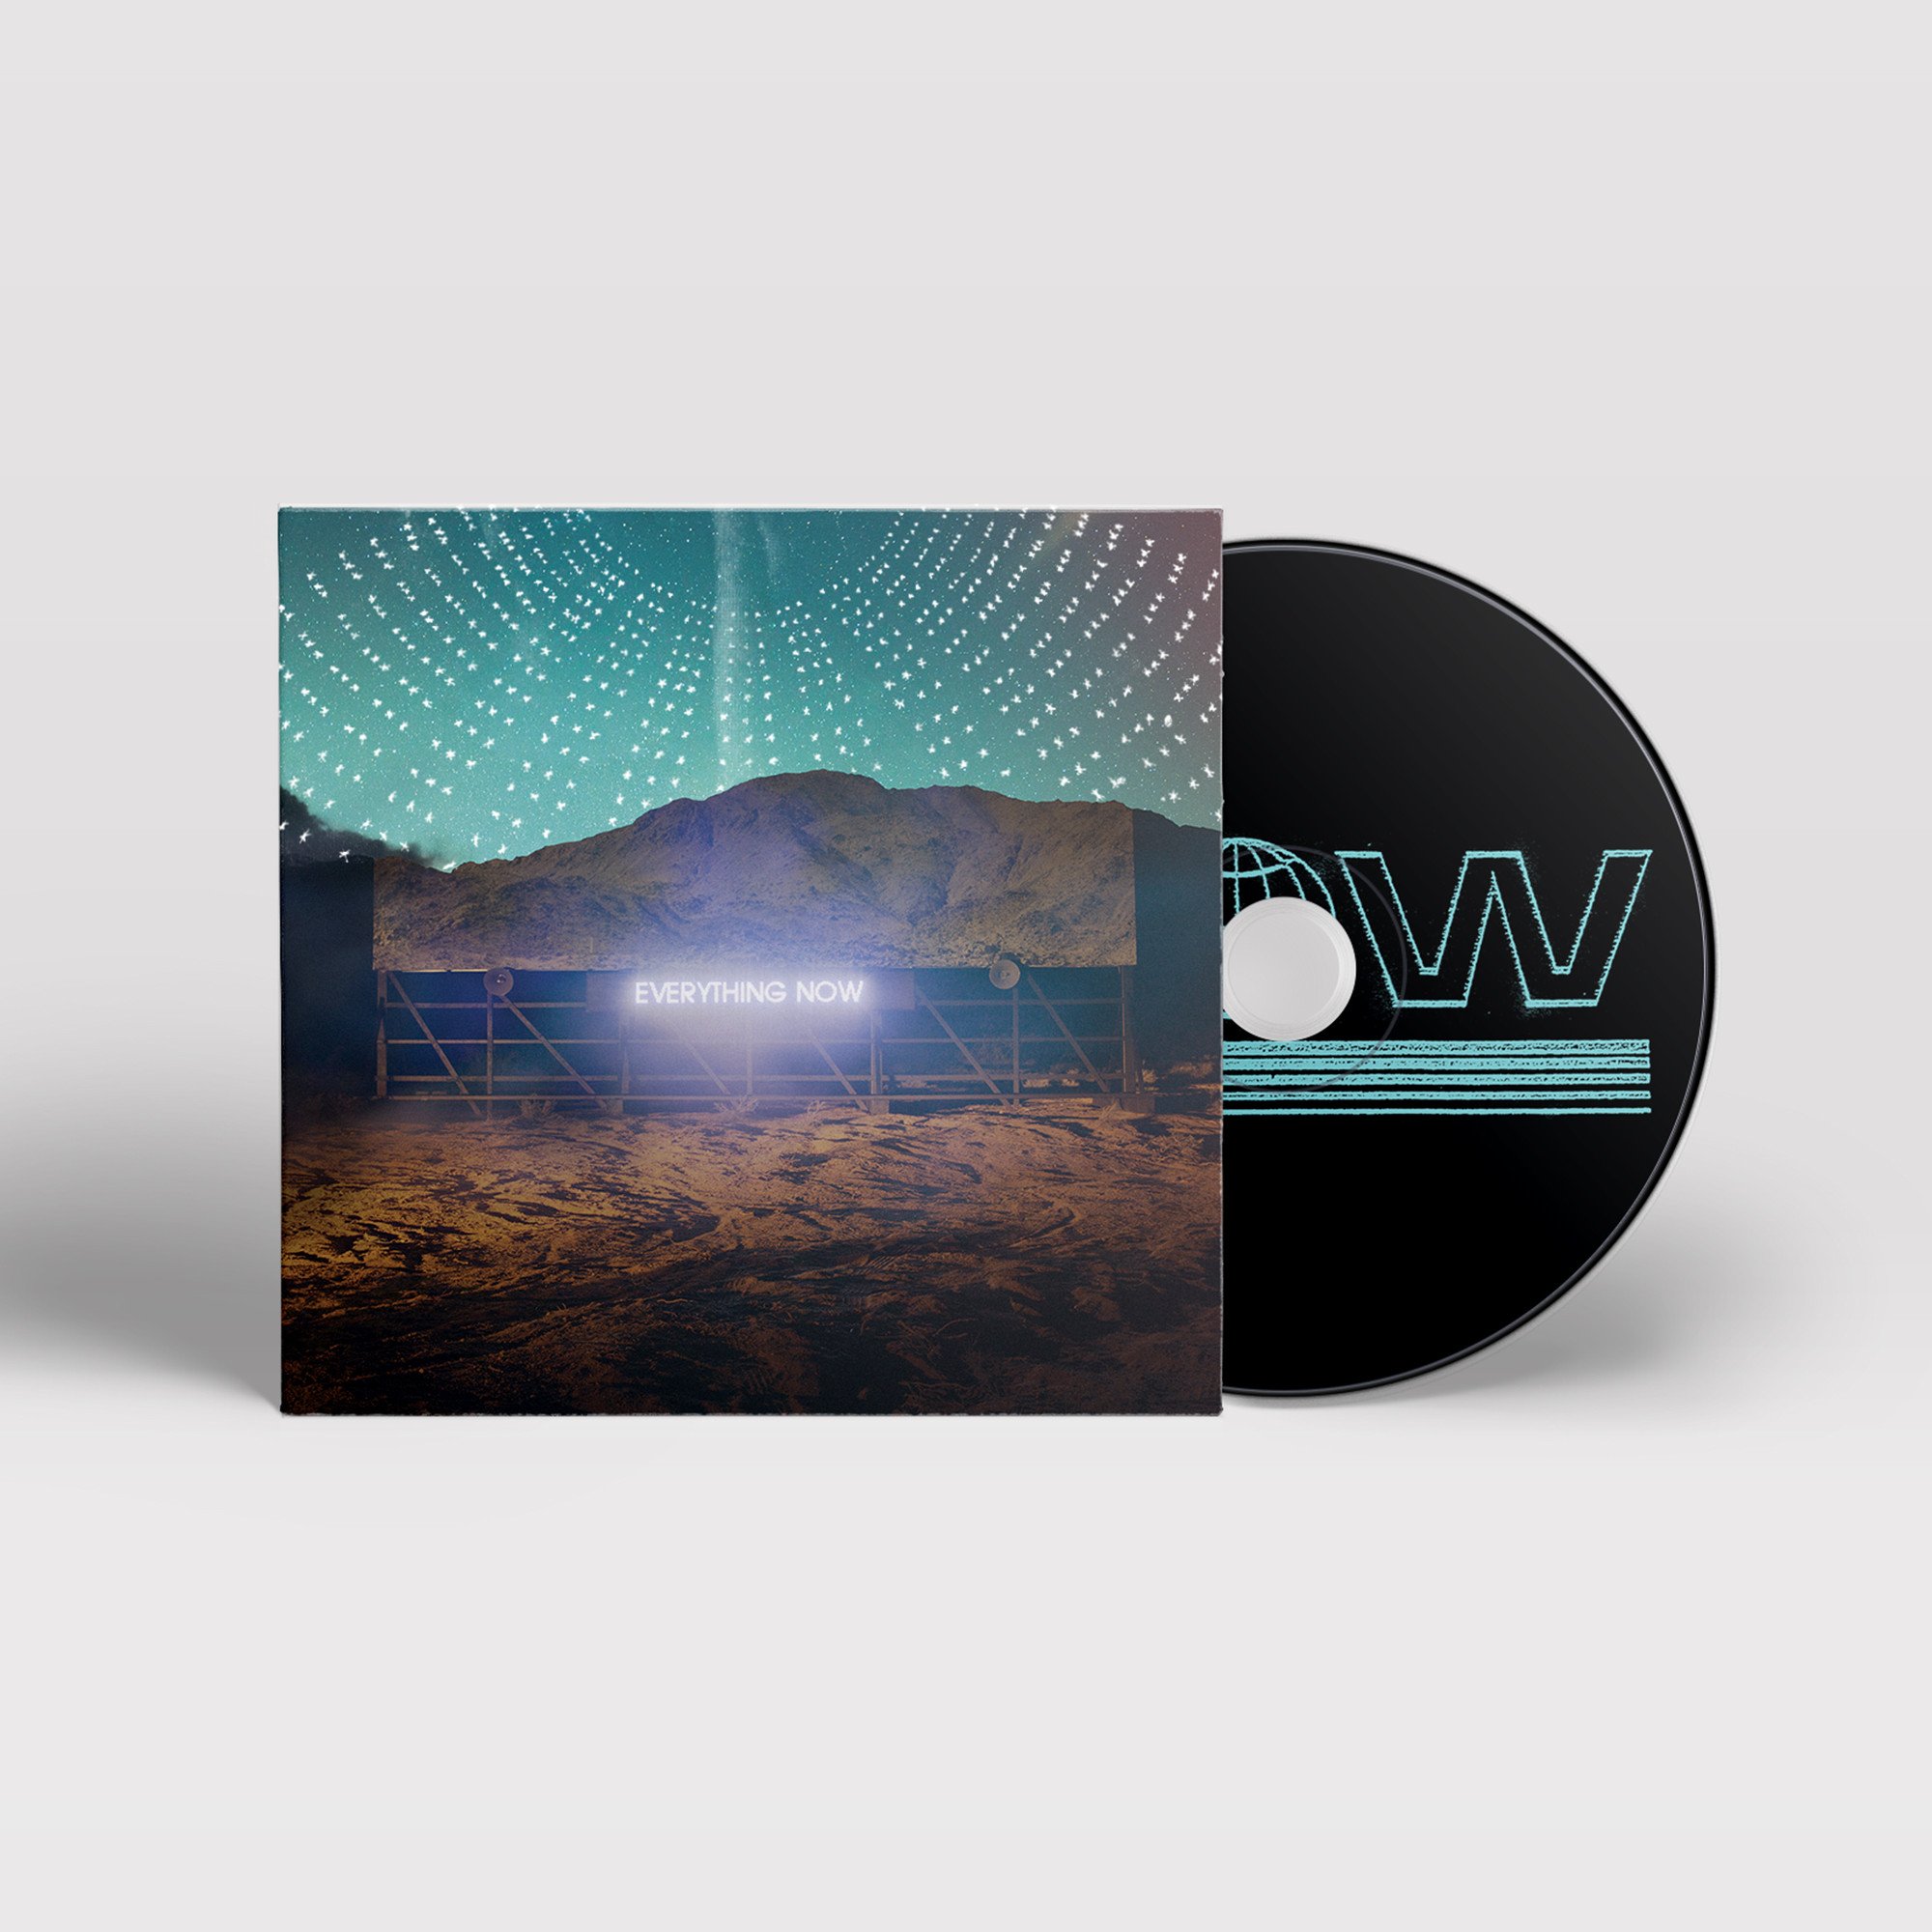 LIMITED EDITION CD ('NIGHT' VERSION) | Arcade Fire Official Store